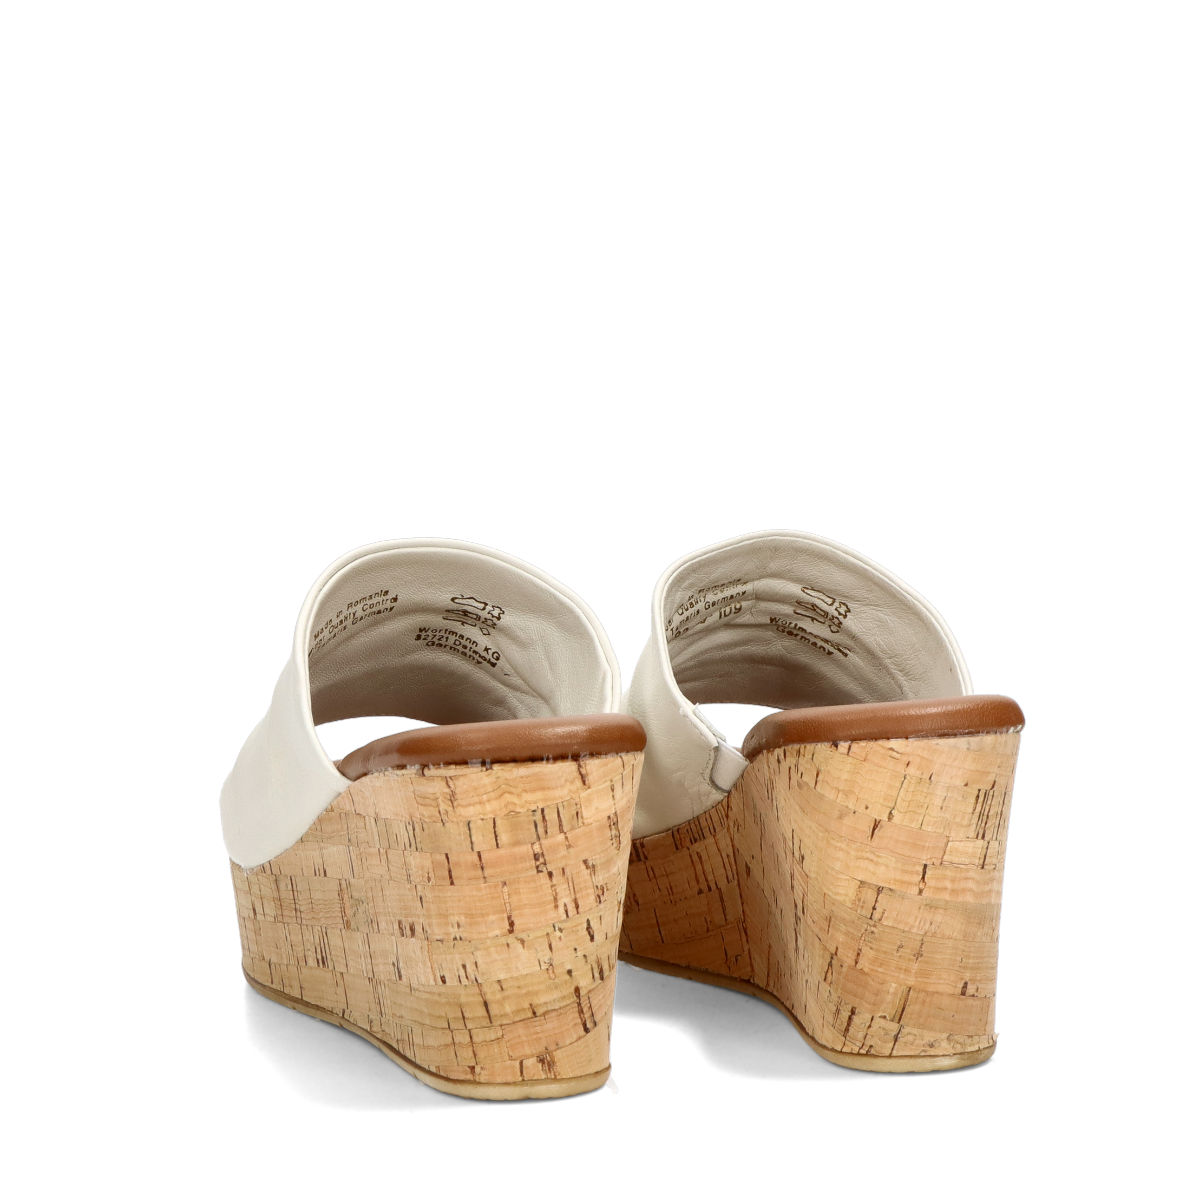 Tamaris women's leather slippers | Robel.shoes